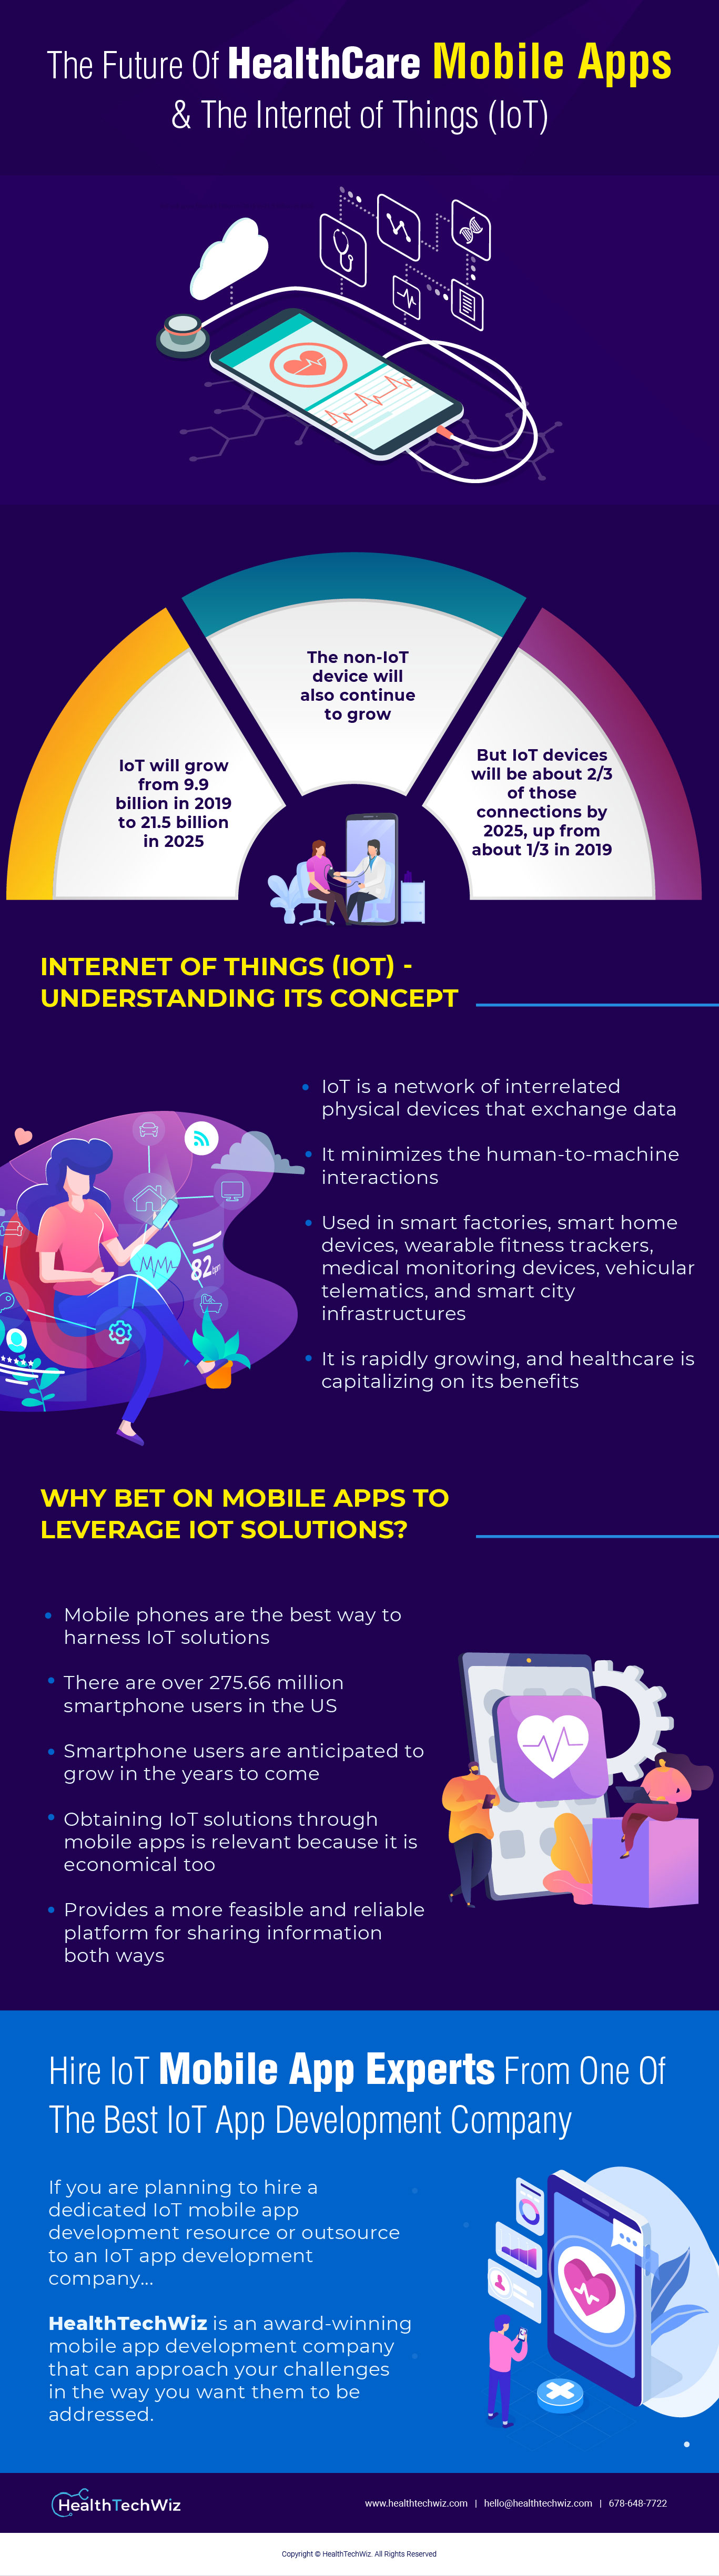 The Future Of HealthCare Mobile Apps & The Internet of Things (IoT)